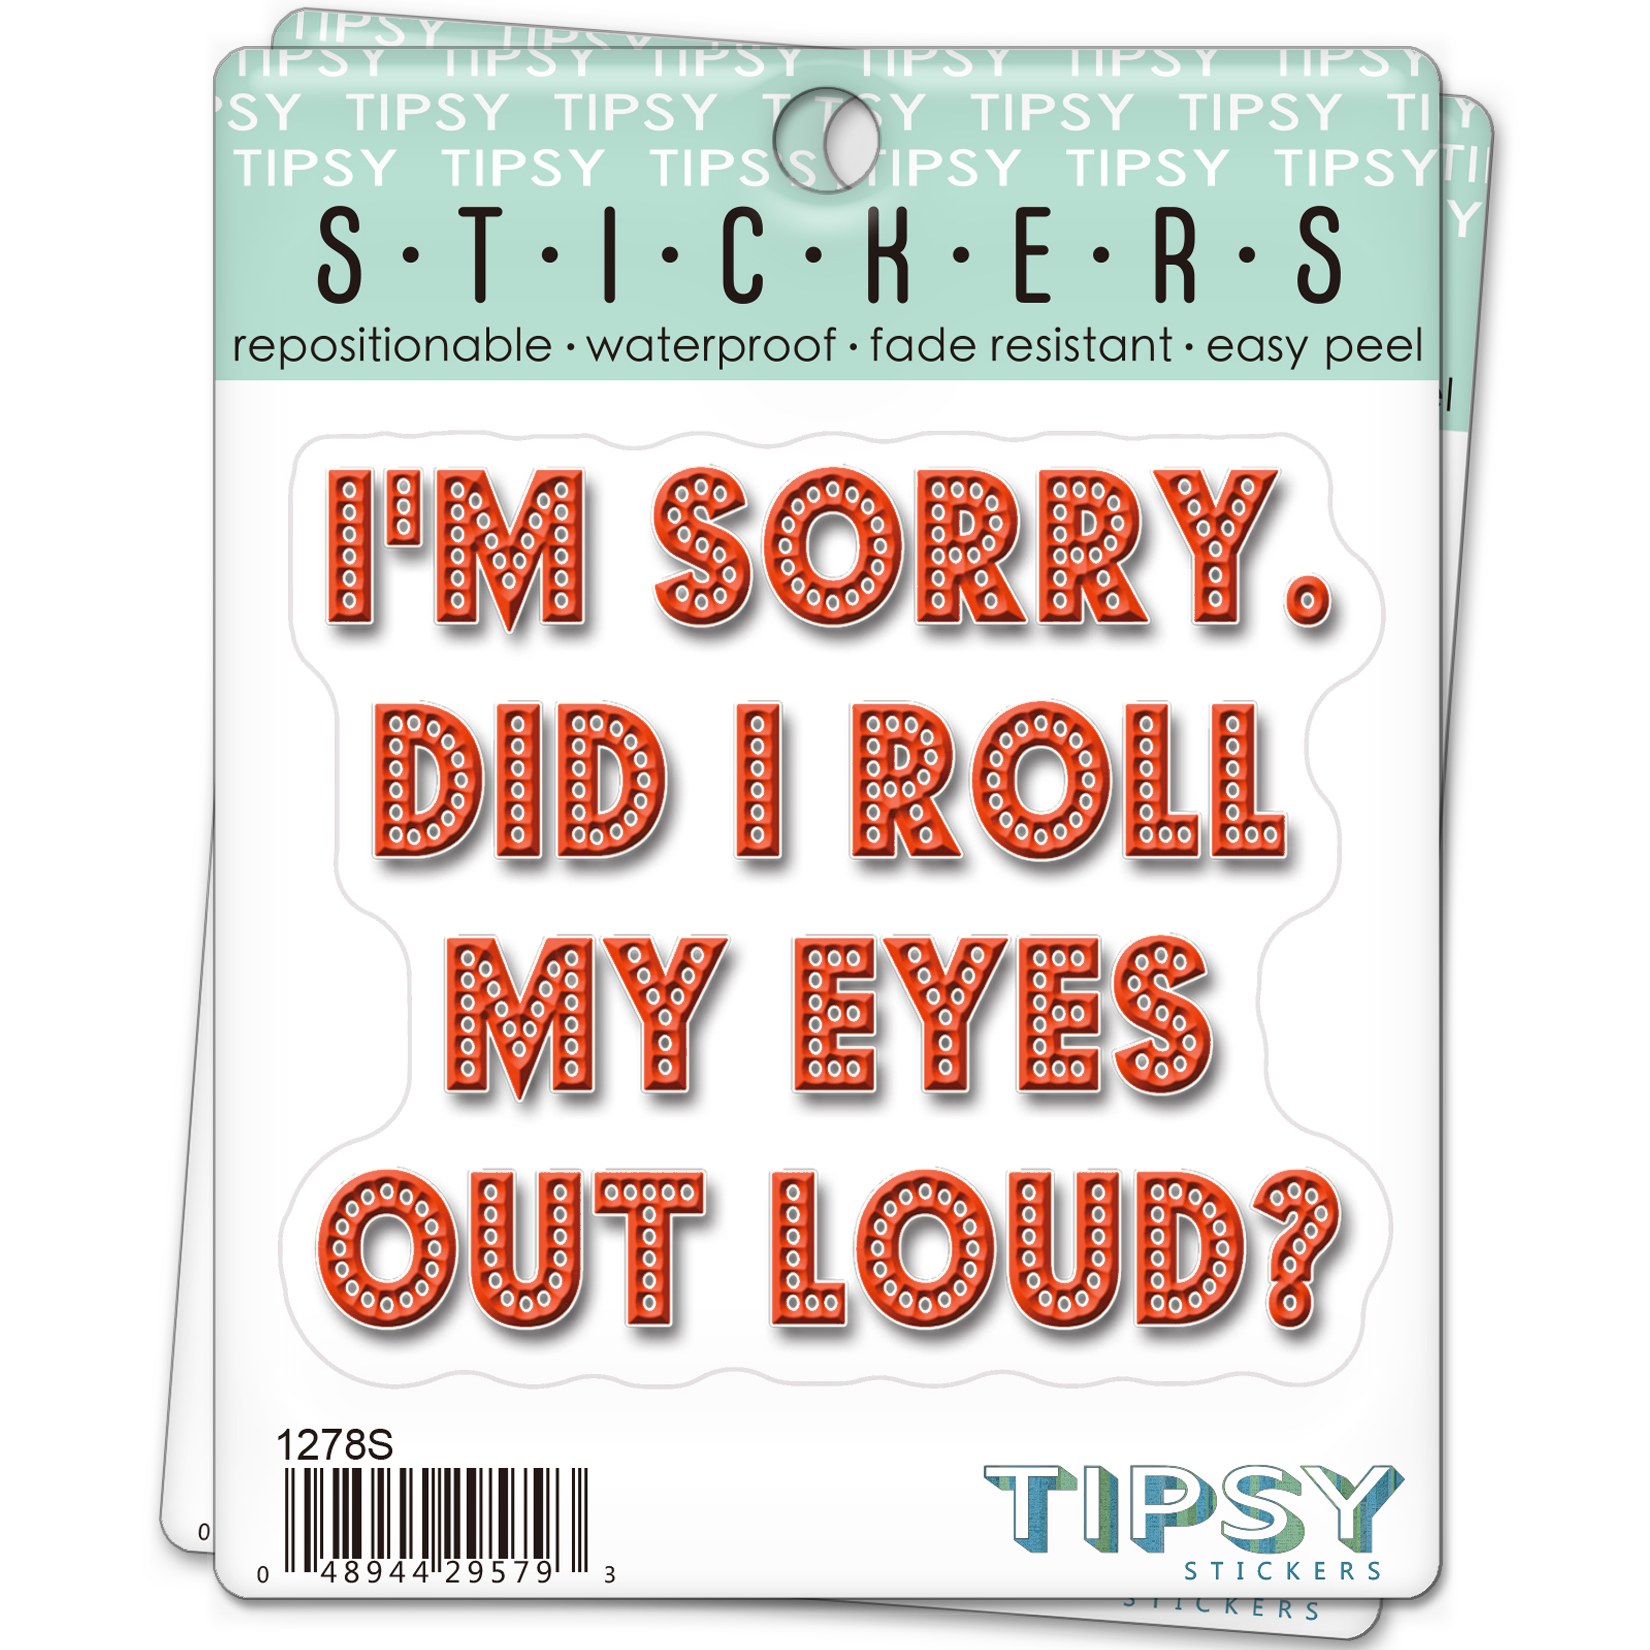 Sticker | I'm sorry did I roll my eyes out loud